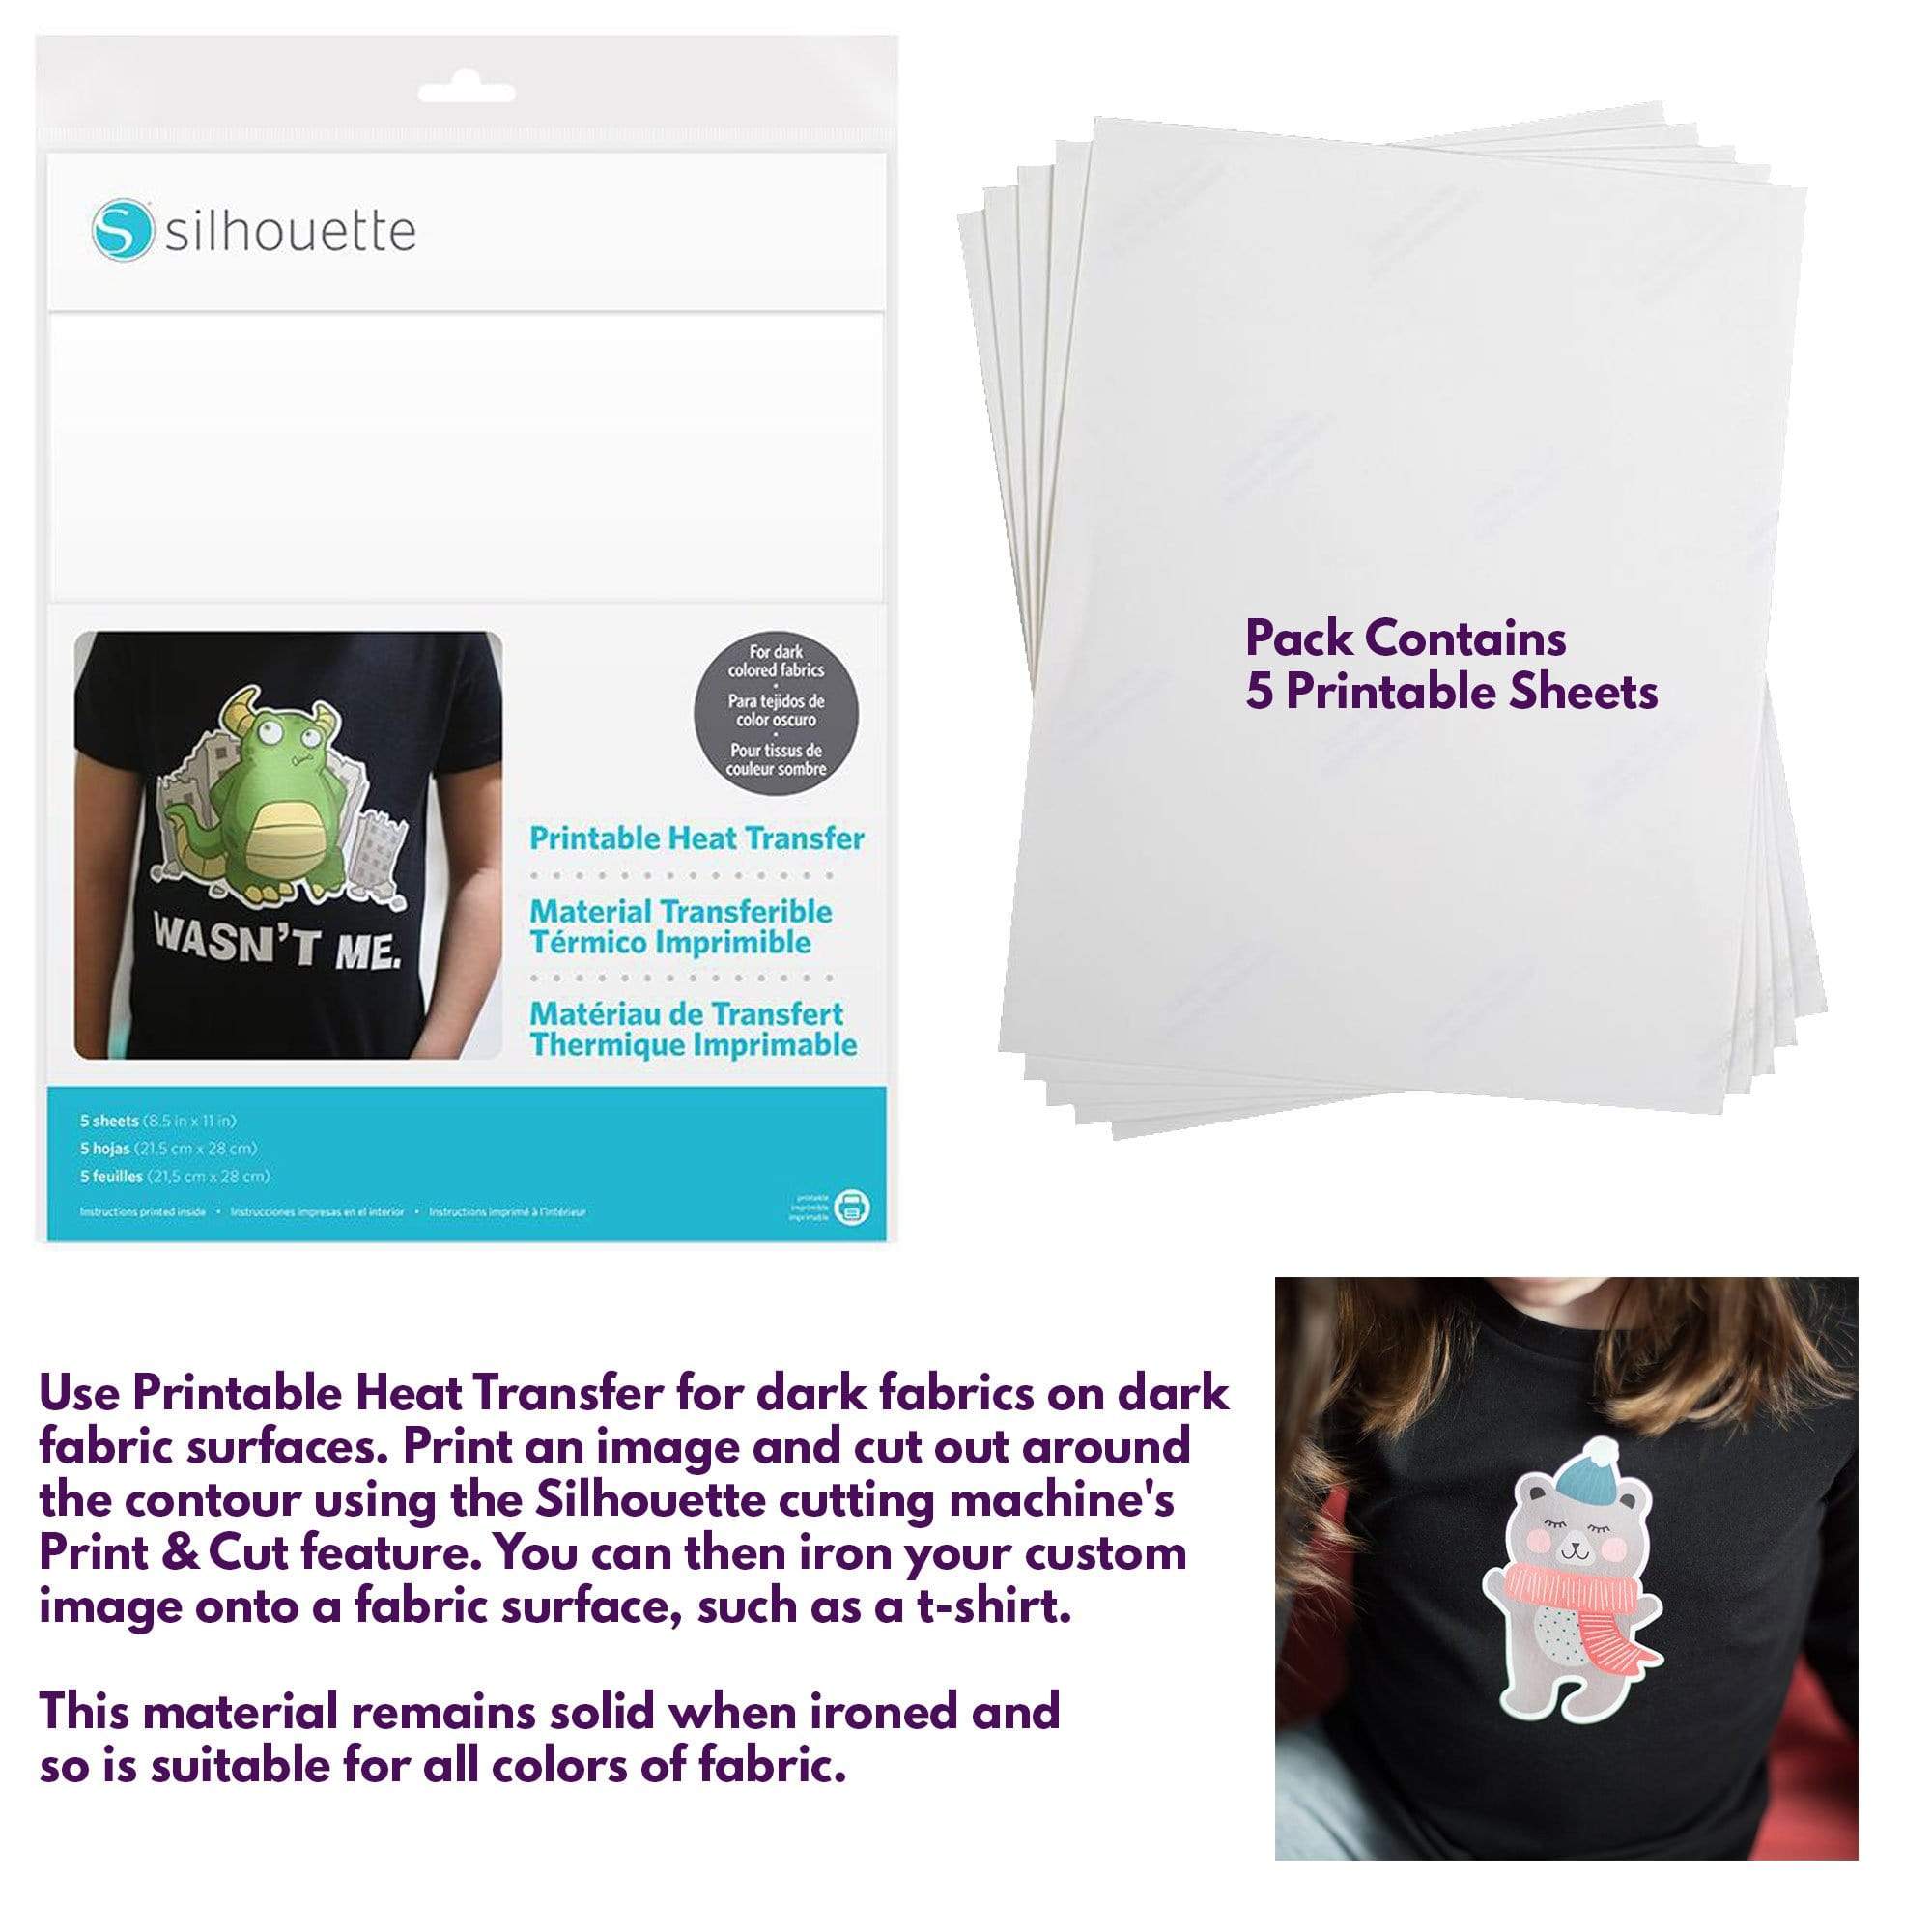 Silhouette America Heat Transfer Materials Silhouette Heat Transfer Favorites Bundle- Includes 12 Sheets of Printable Vinyl (for both light and dark material) ,2 Rolls of Glitter Heat Transfer Material, and Intro to Silhouette 101 with Free Designs